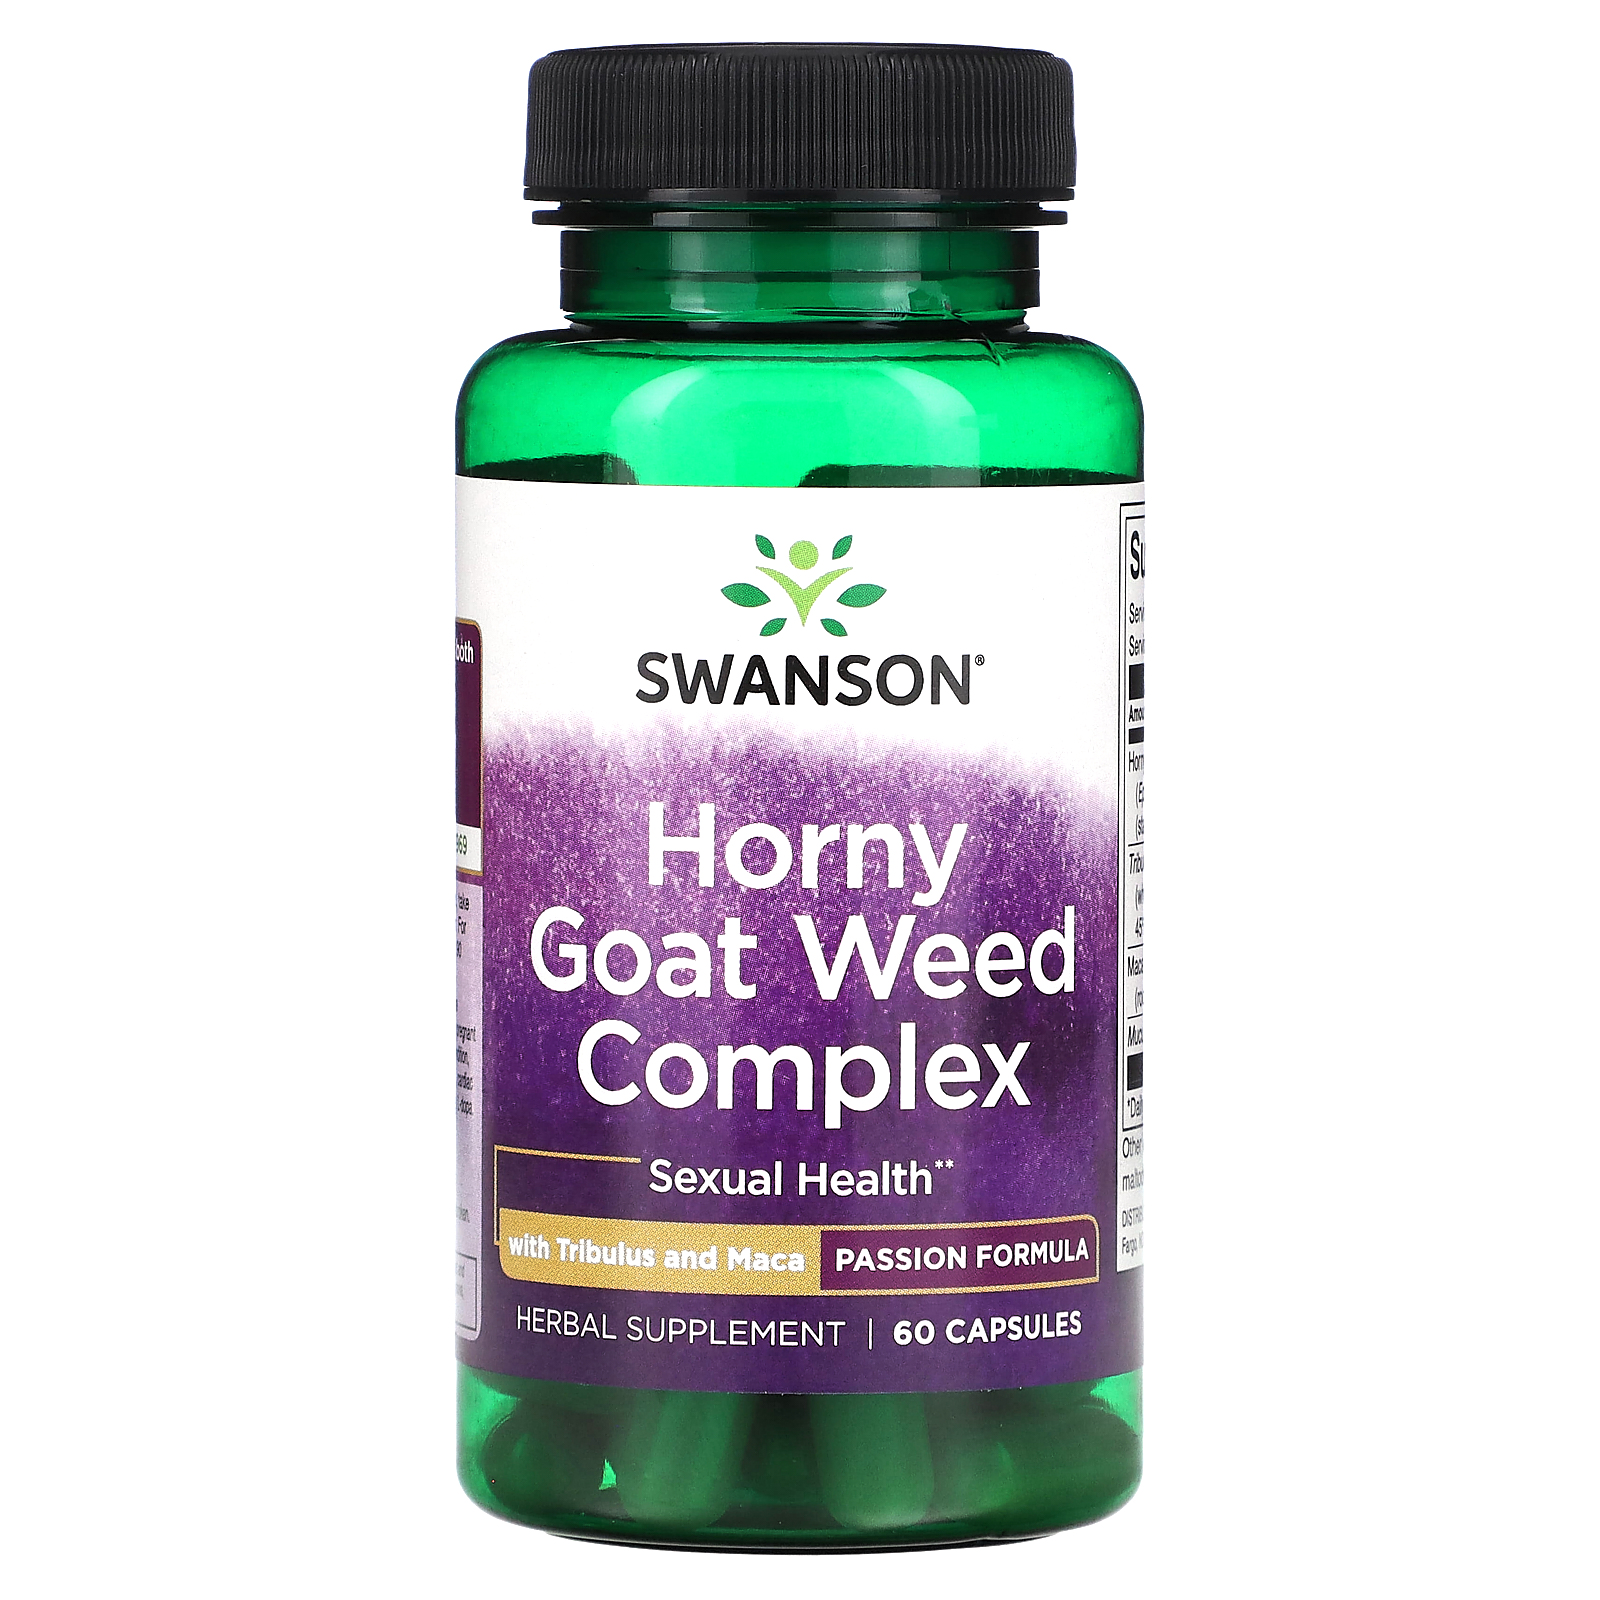 Swanson Horny Goat Weed Complex With Tribulus And Maca 60 Capsules 1880